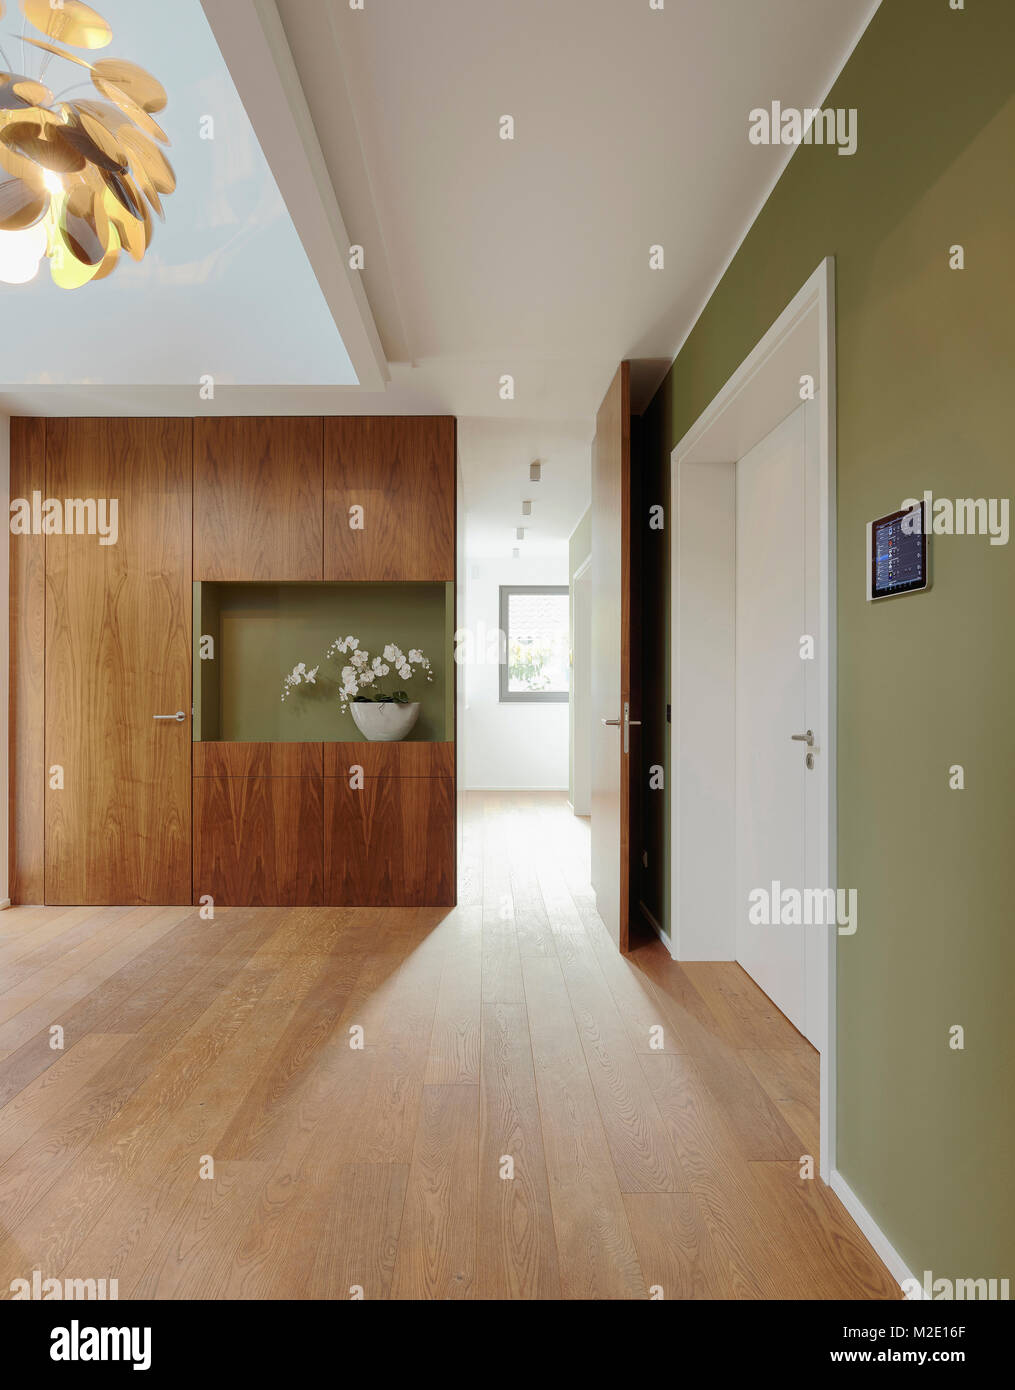 Plank floor and walnut wall covering in home Stock Photo